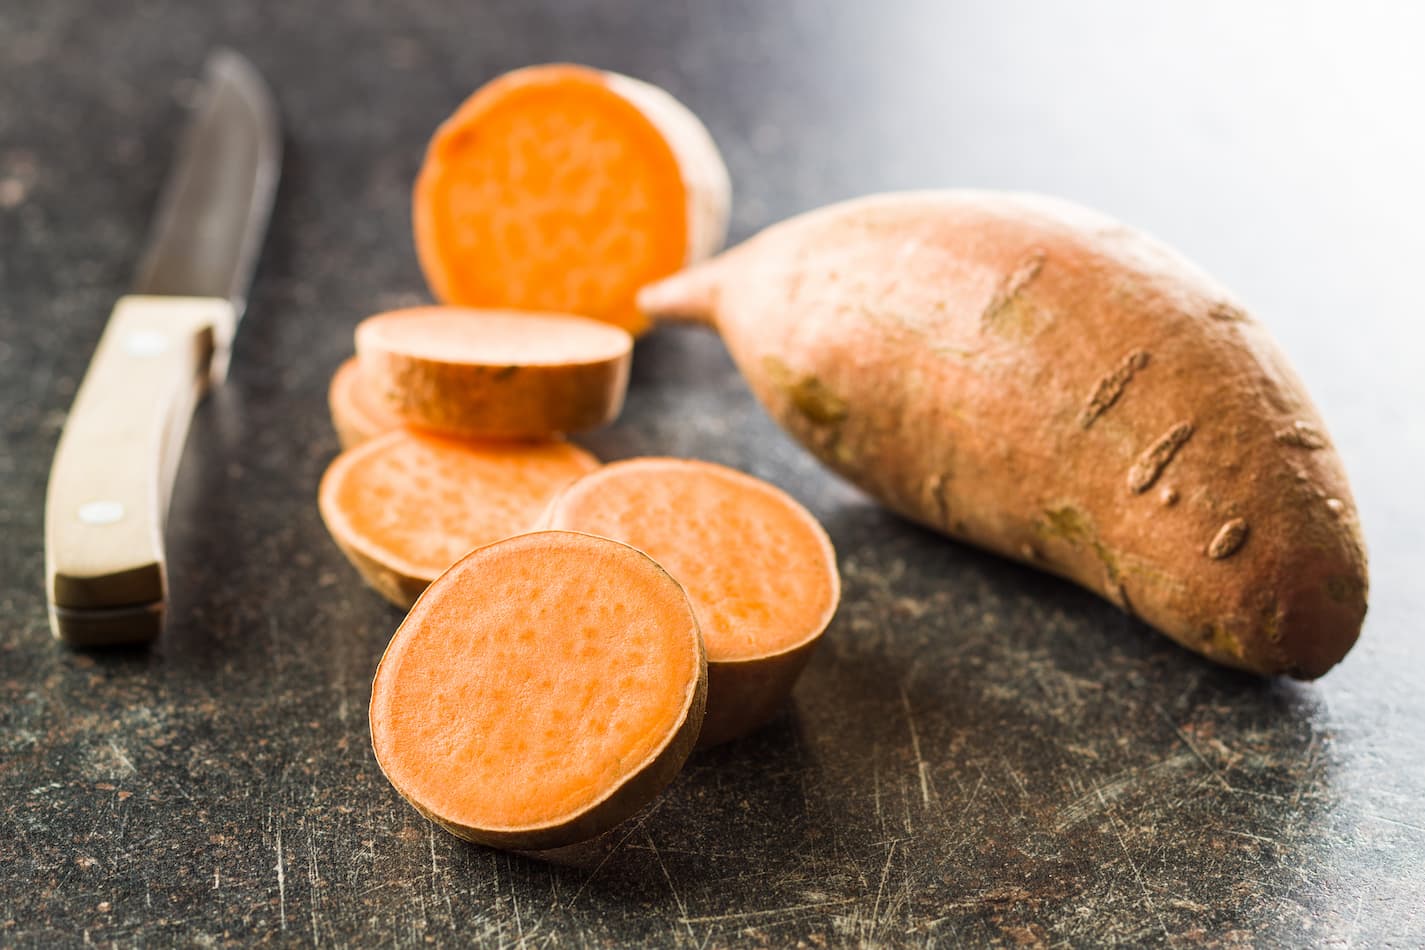 An image of sliced raw-cut sweet potatoes and a cutting knife.